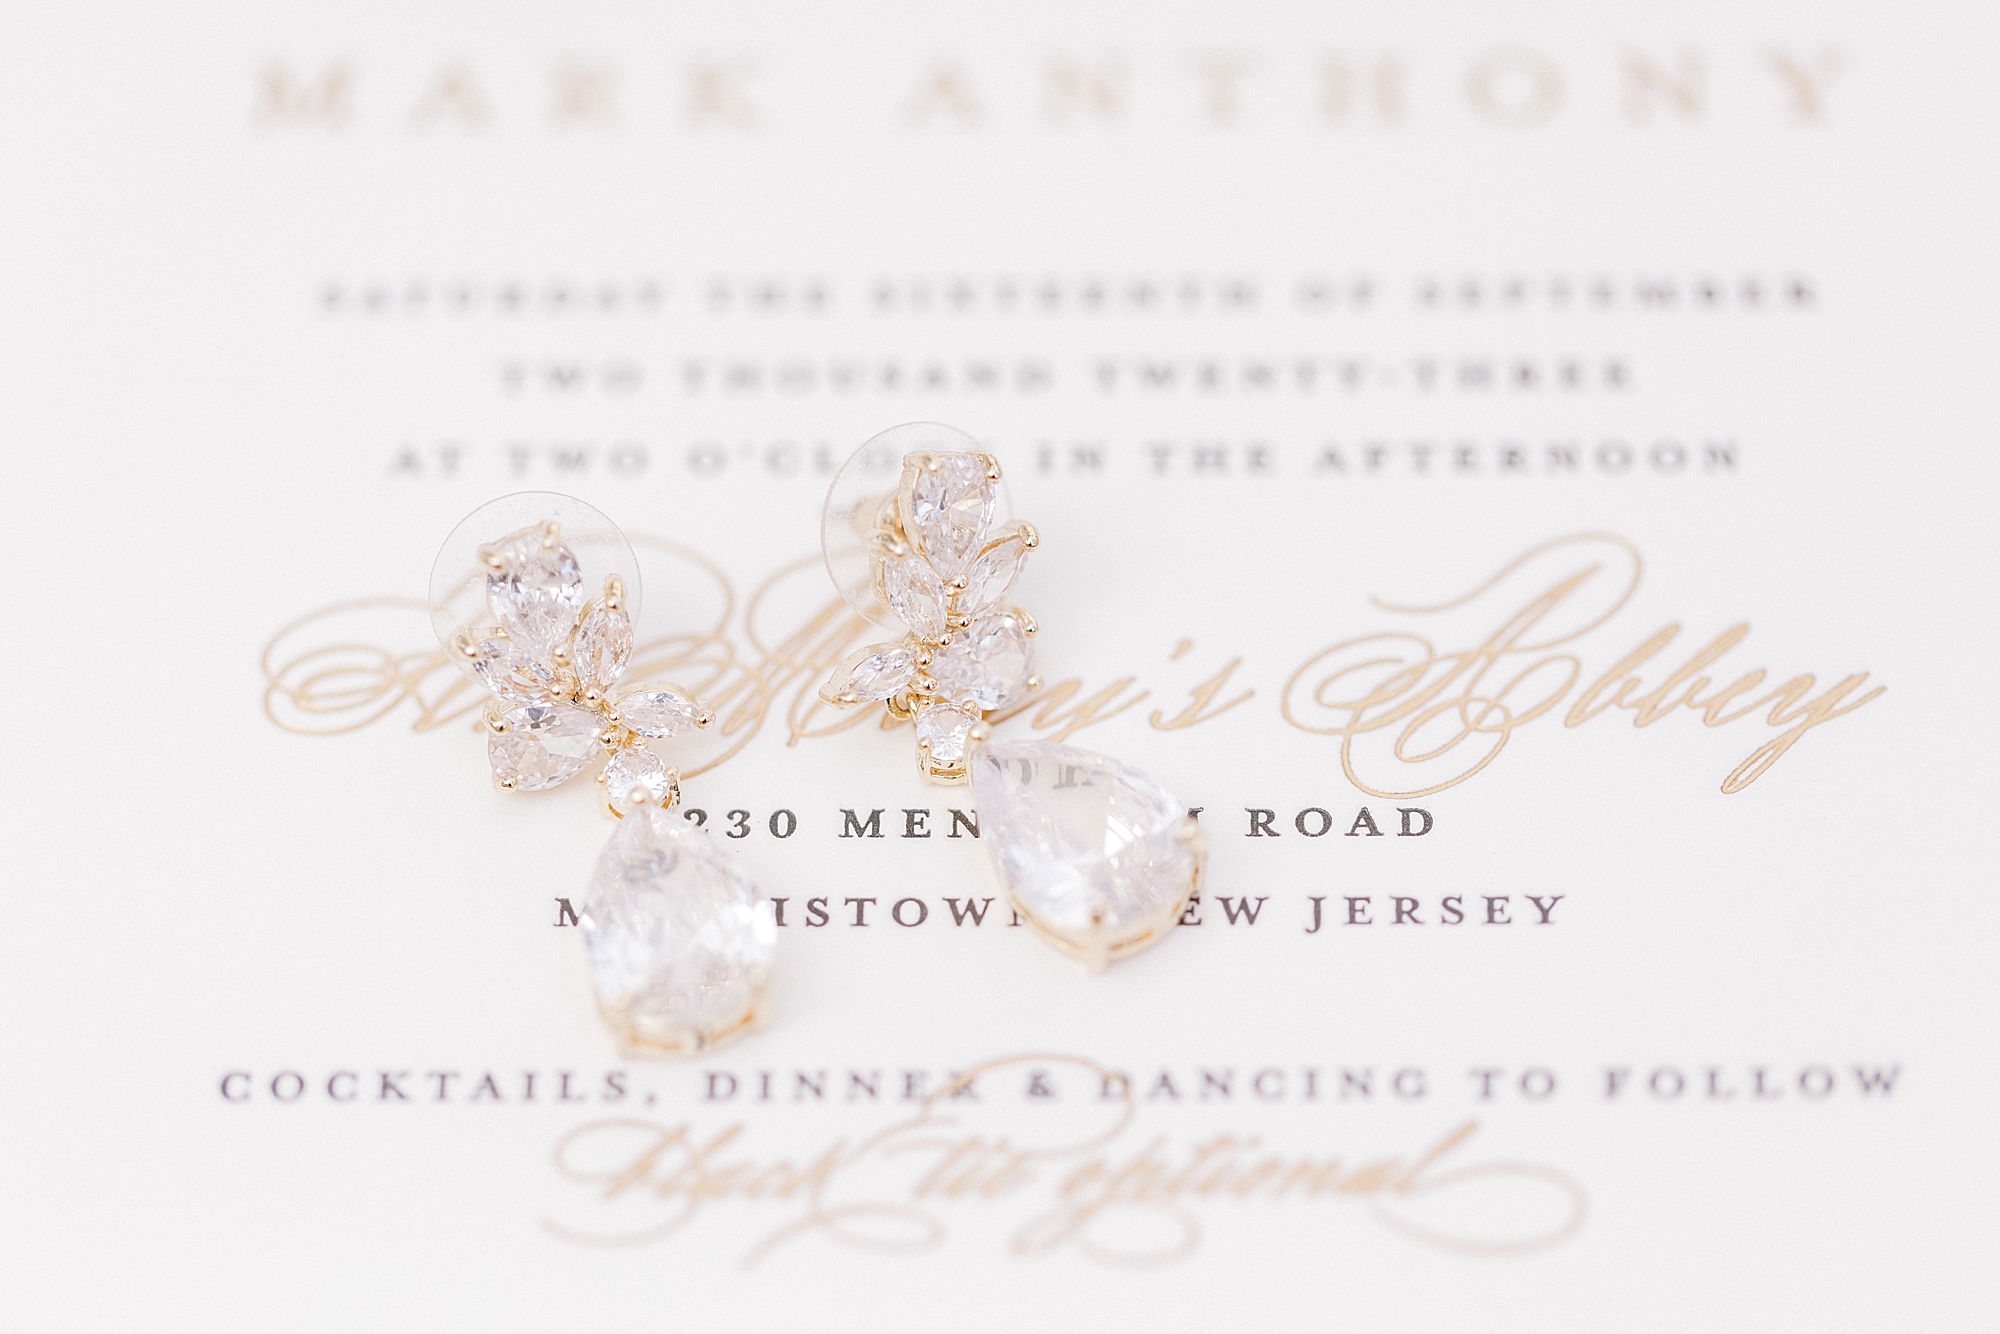 dangling pearl earrings on stationery set at the Farmhouse